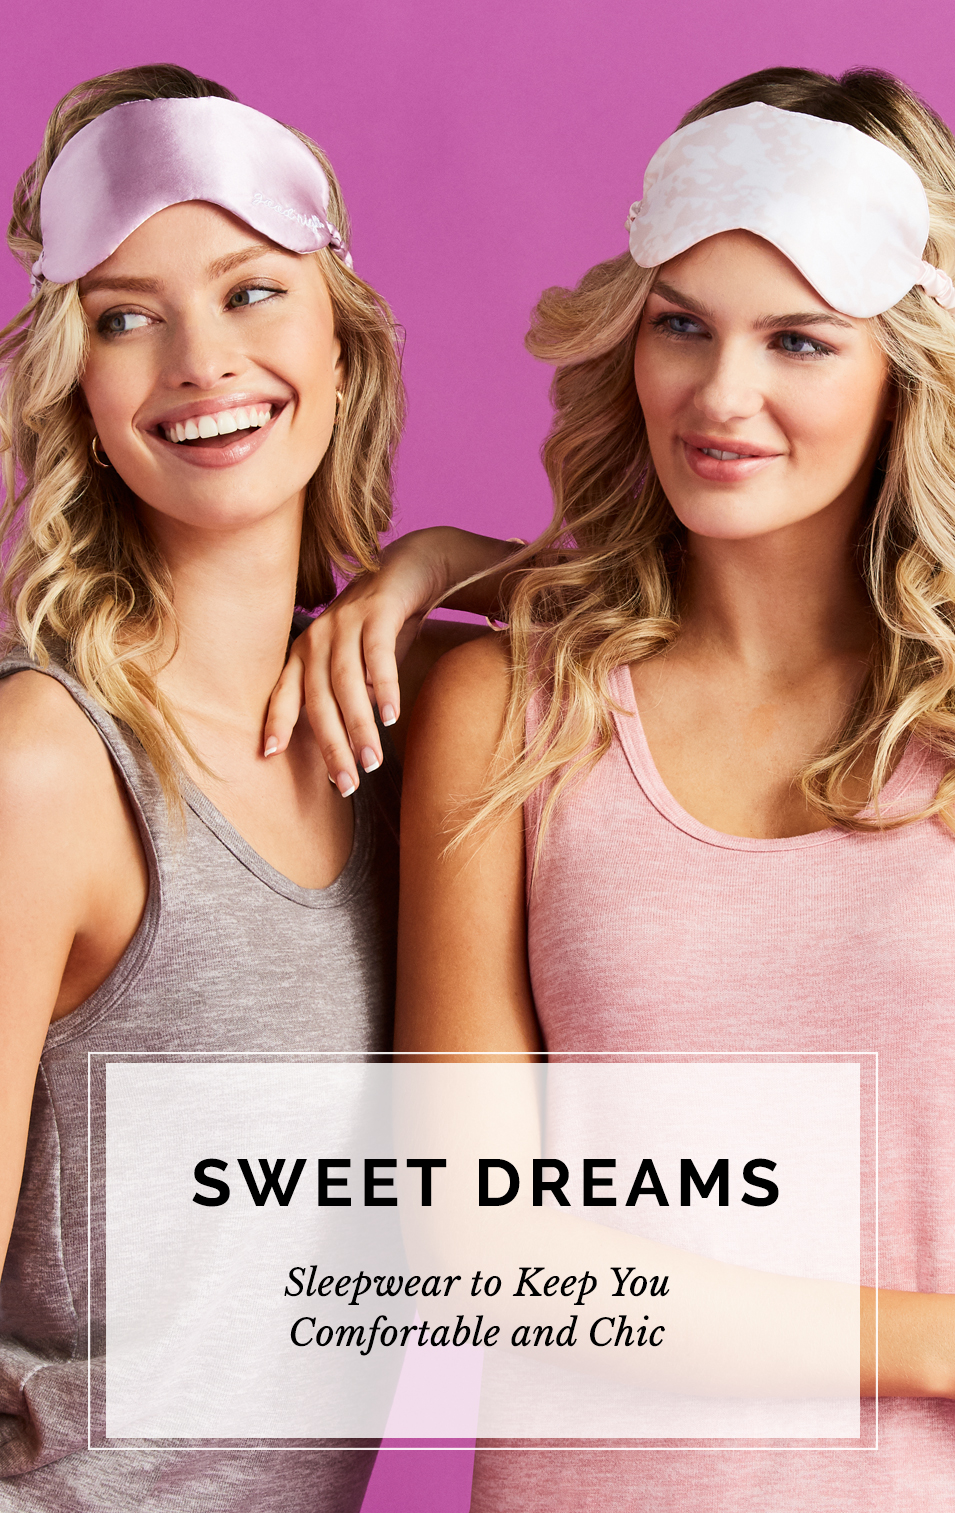 Sweet Dreams - Sleepwear to Keep You Comfortable and Chic